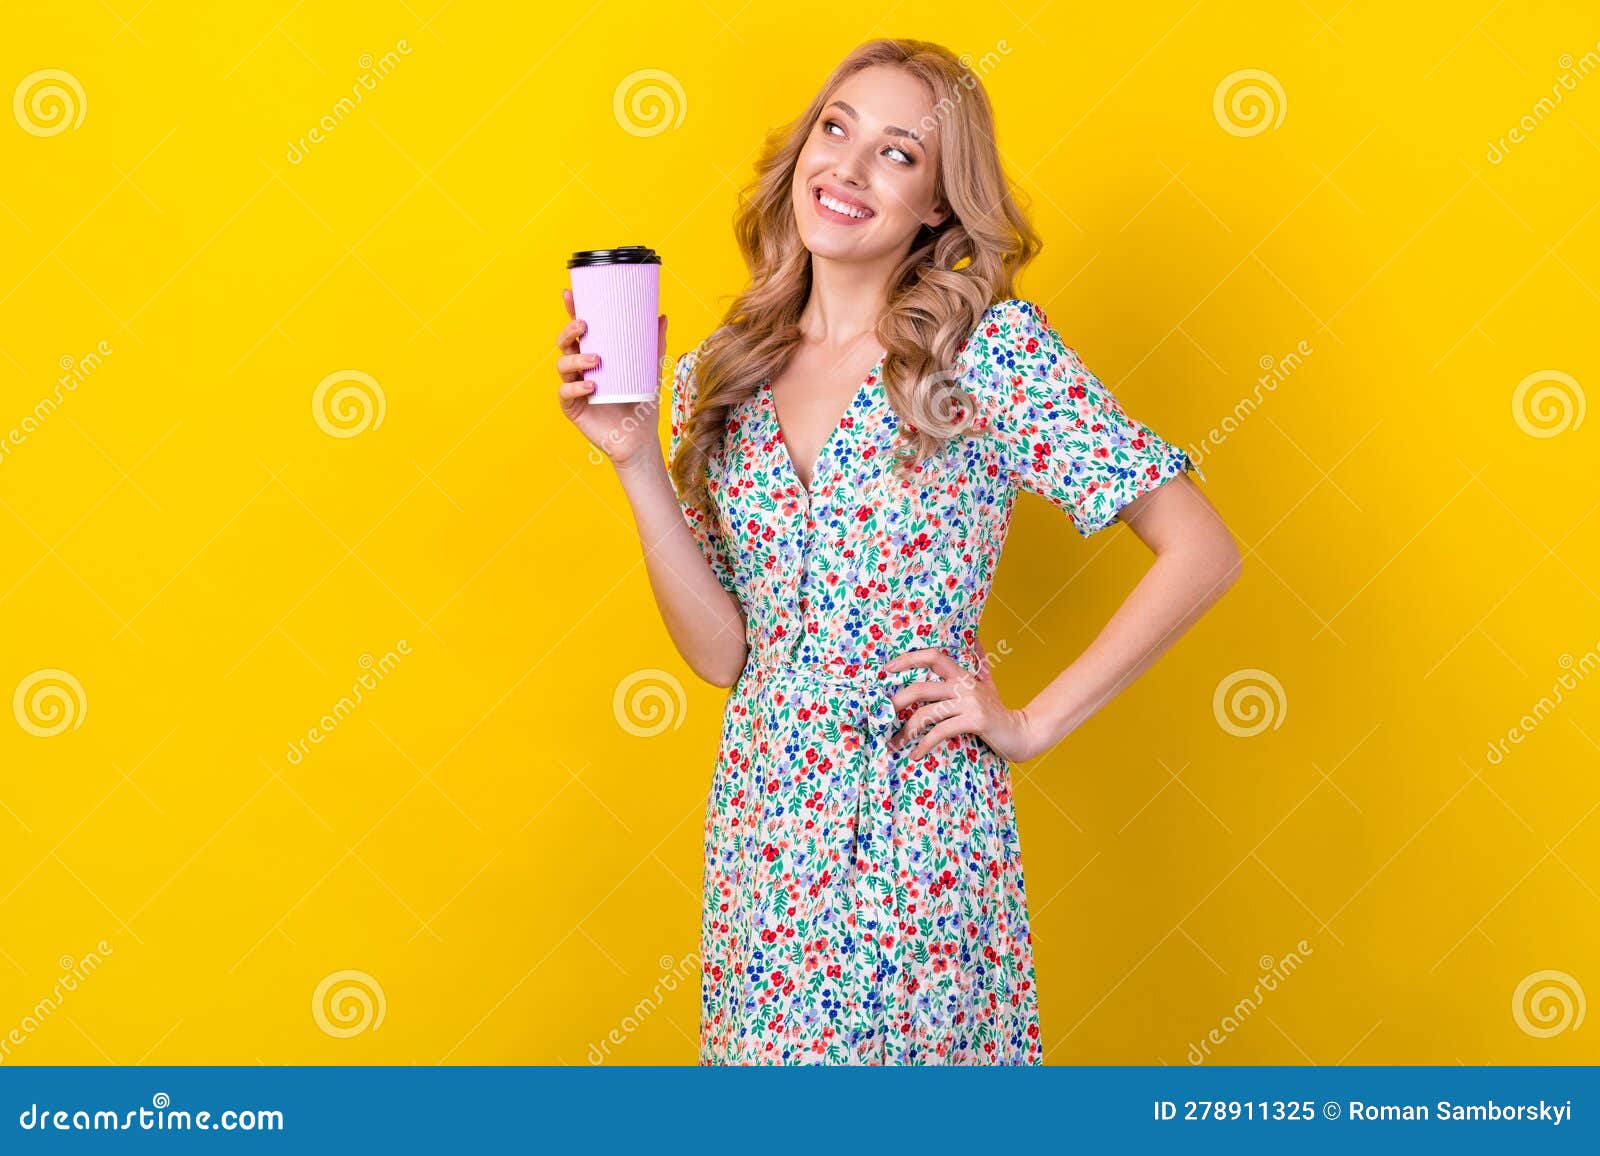 5. Wavy Blonde Hair Girl Stock Photos, Pictures & Royalty-Free Images - iStock - wide 1